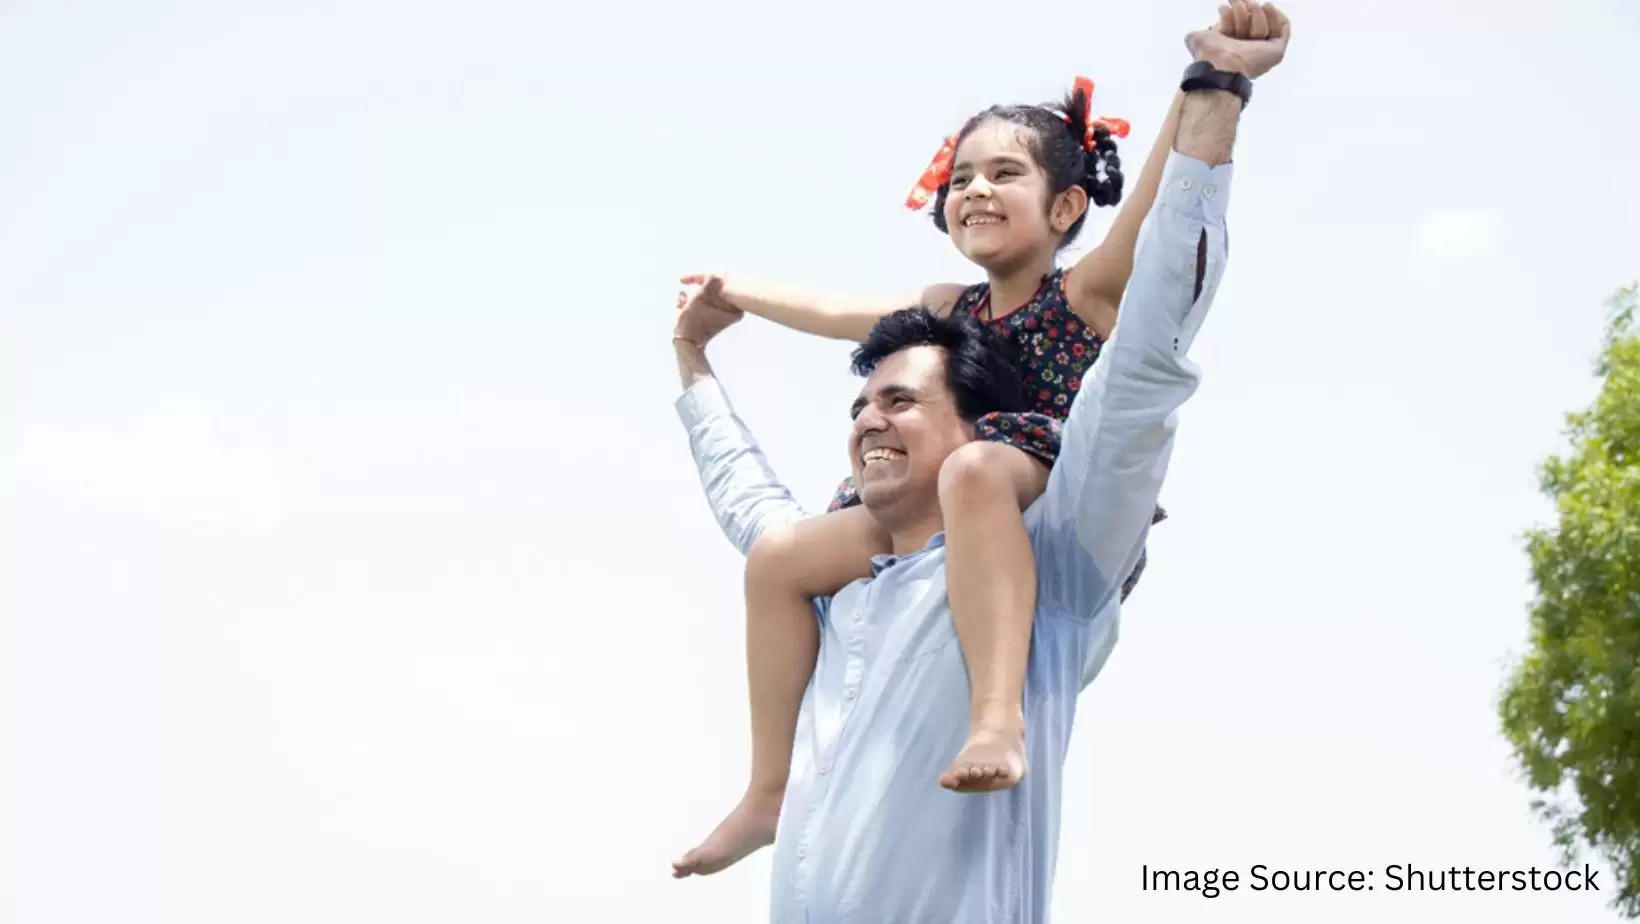 Here's How Life Insurance Plans Can Come to your Family's Rescue